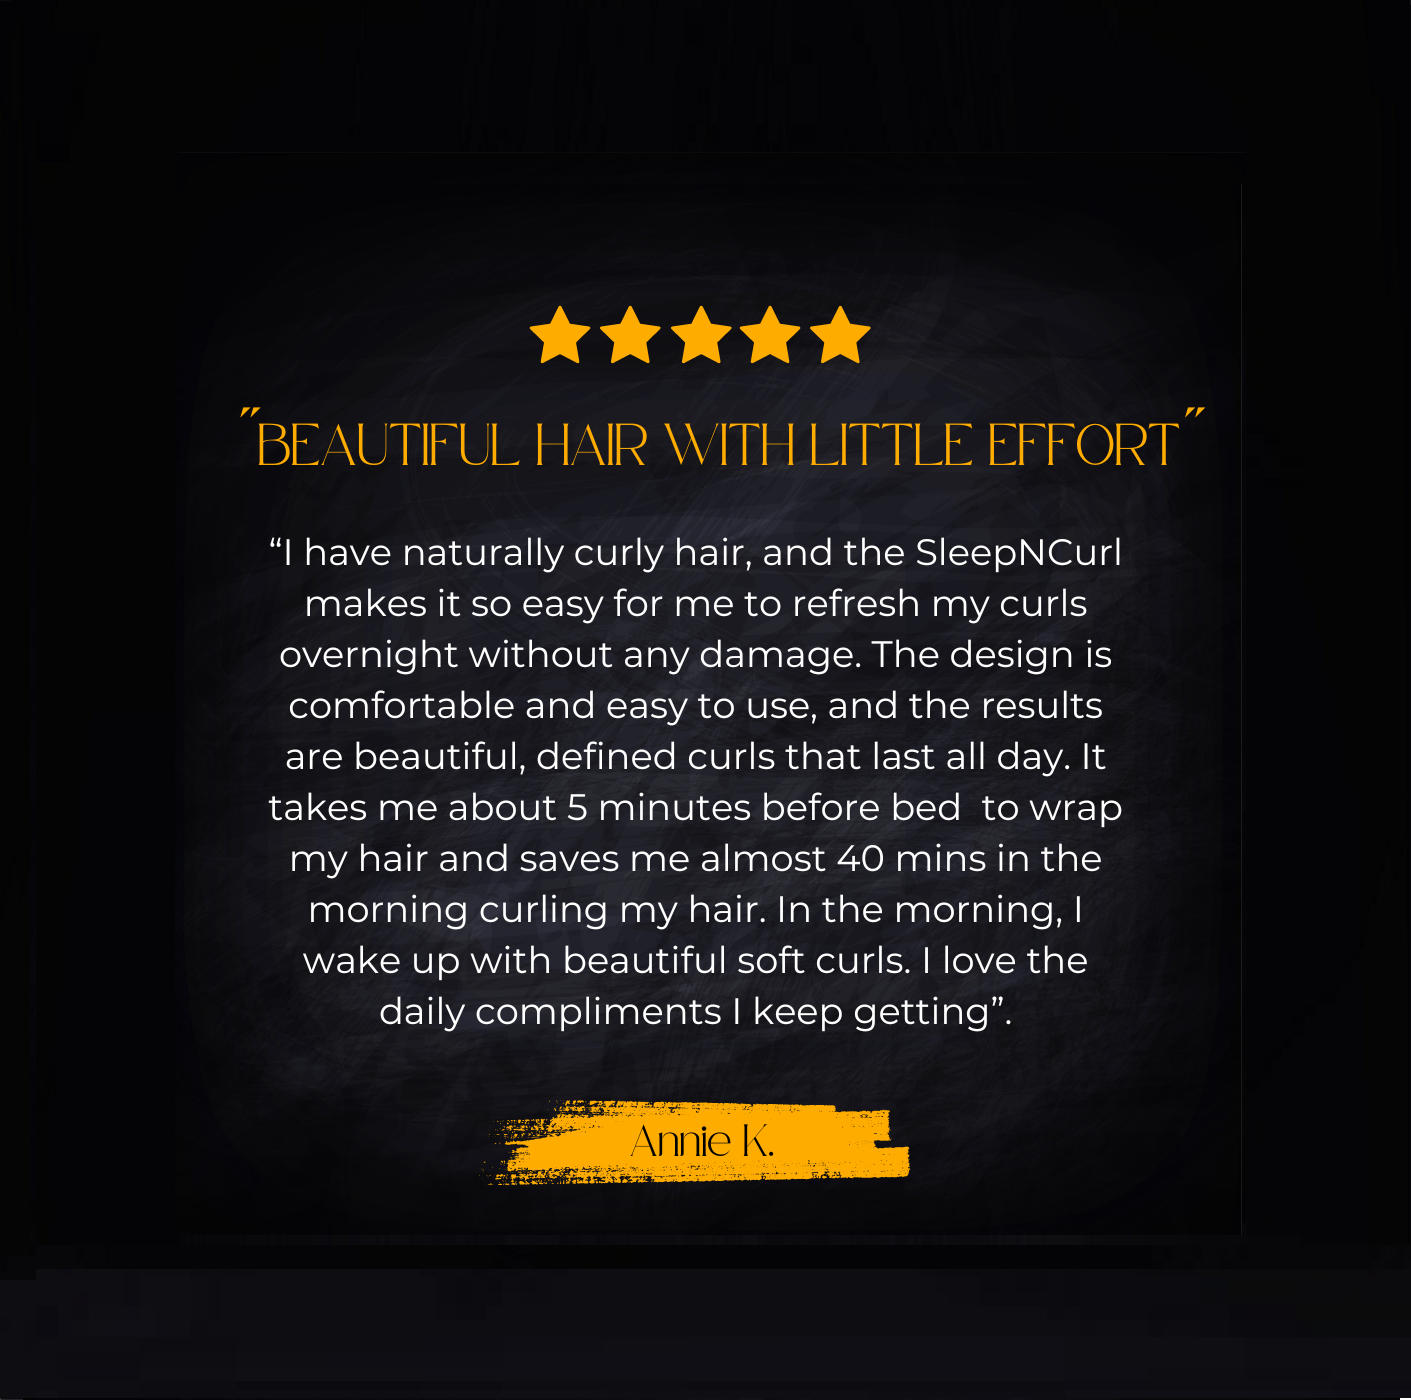 5 star product review from a customer about the Sleep 'N Curl heatless hair curler